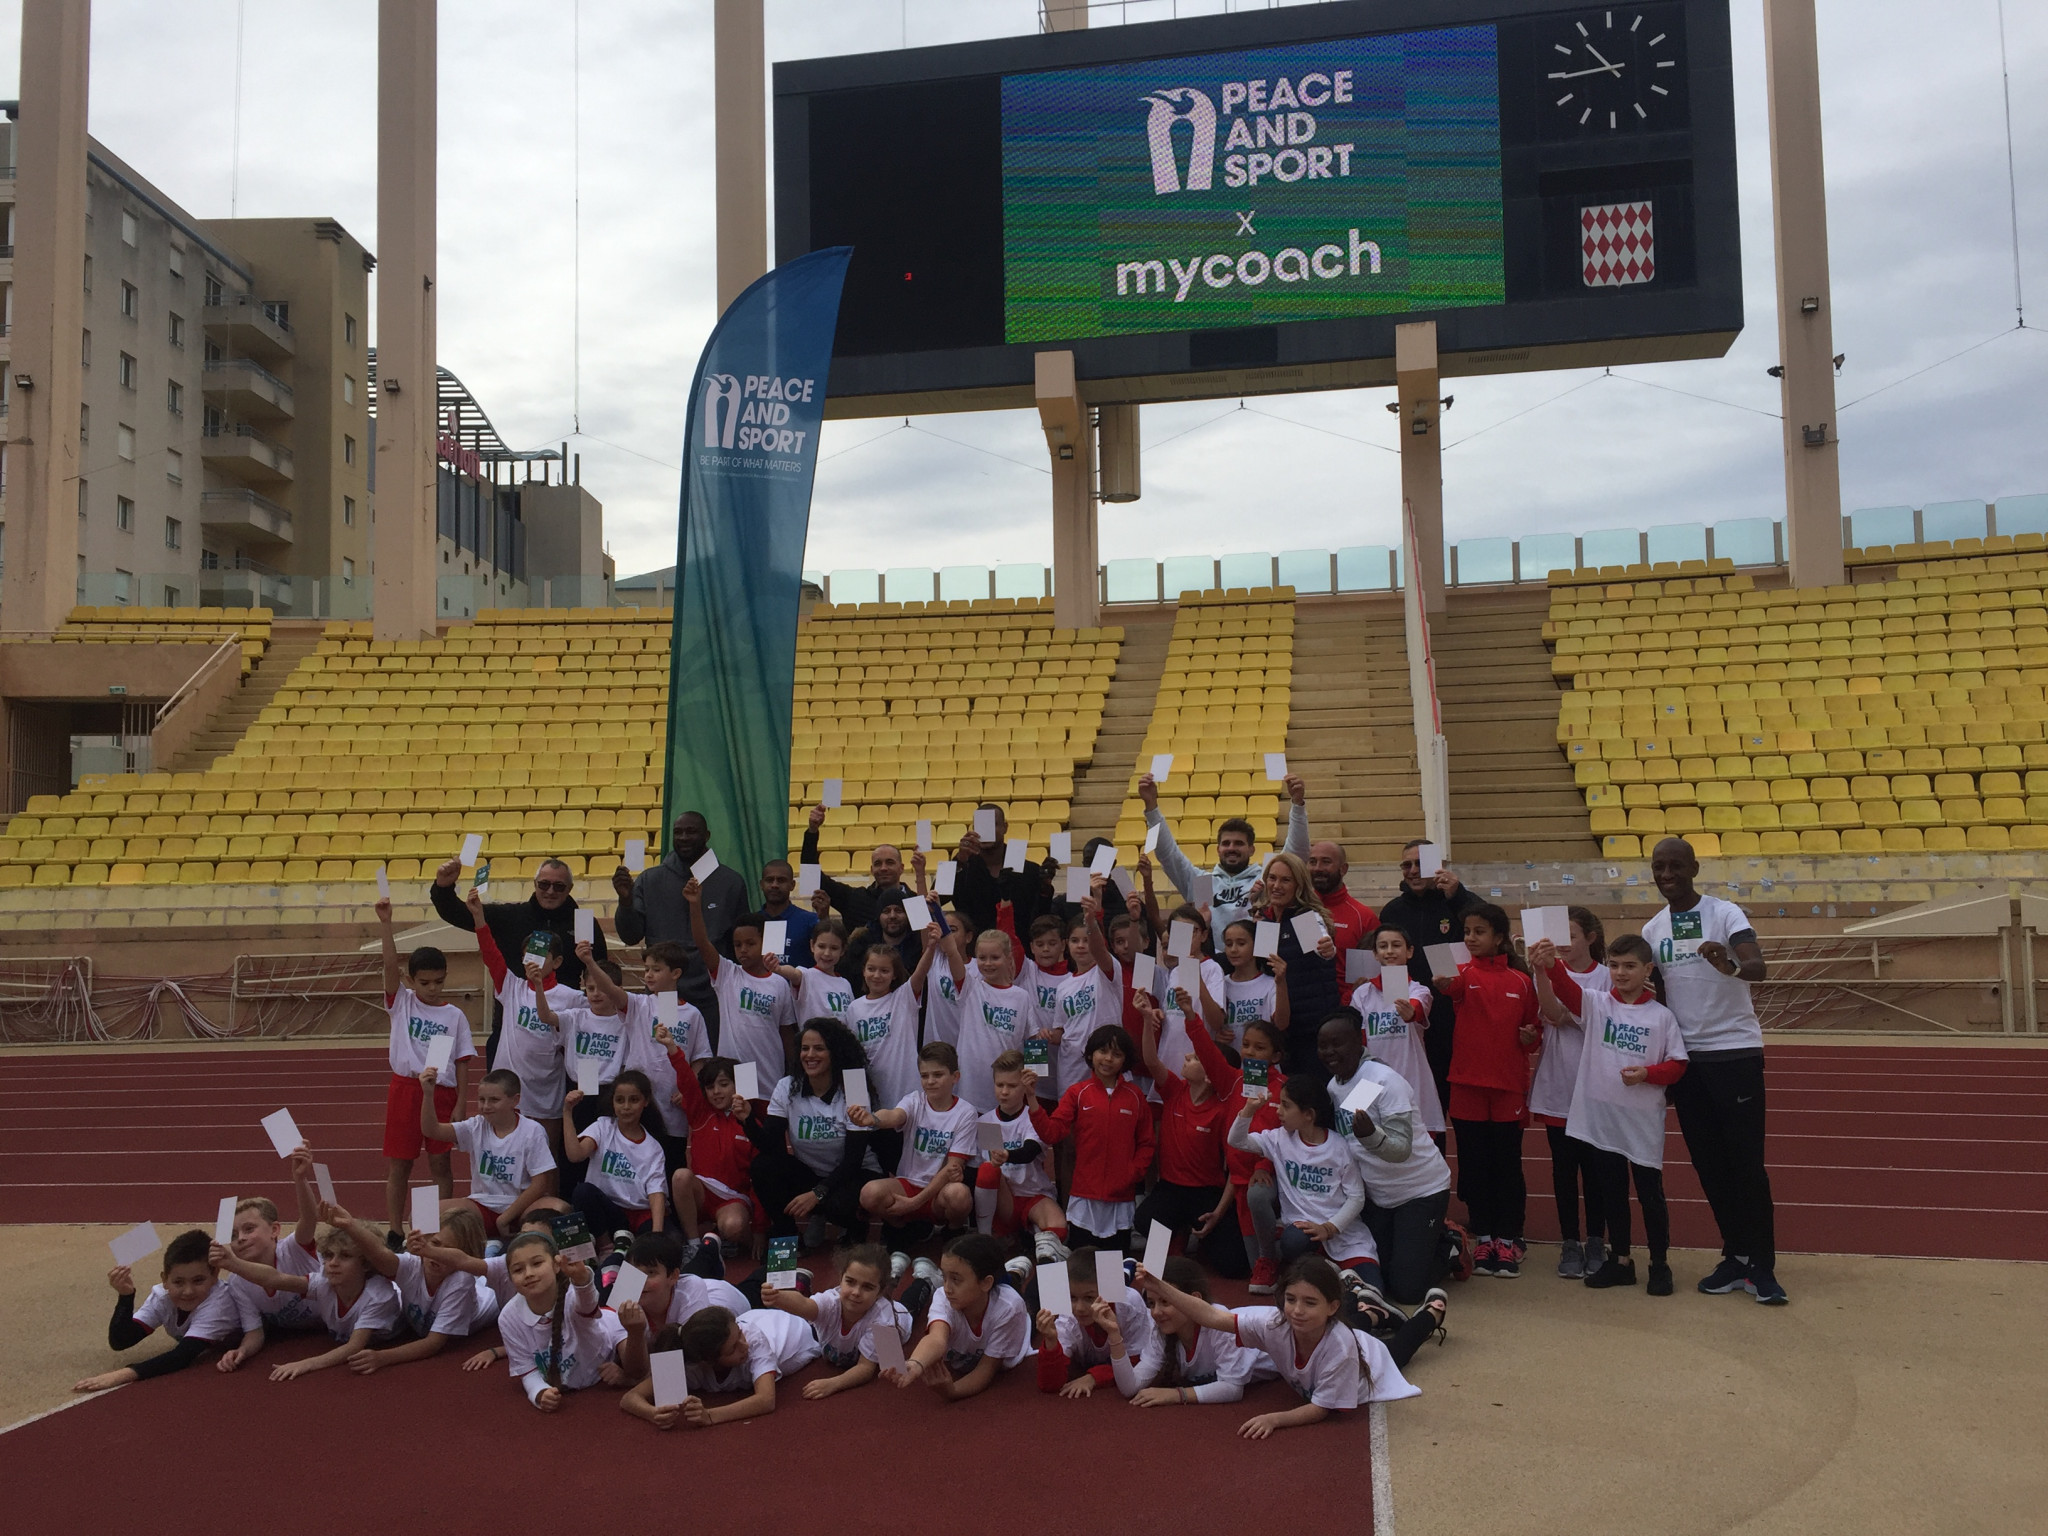 The children and Champions for Peace all showed a white card, a Peace and Sport symbolic initiative ©ITG